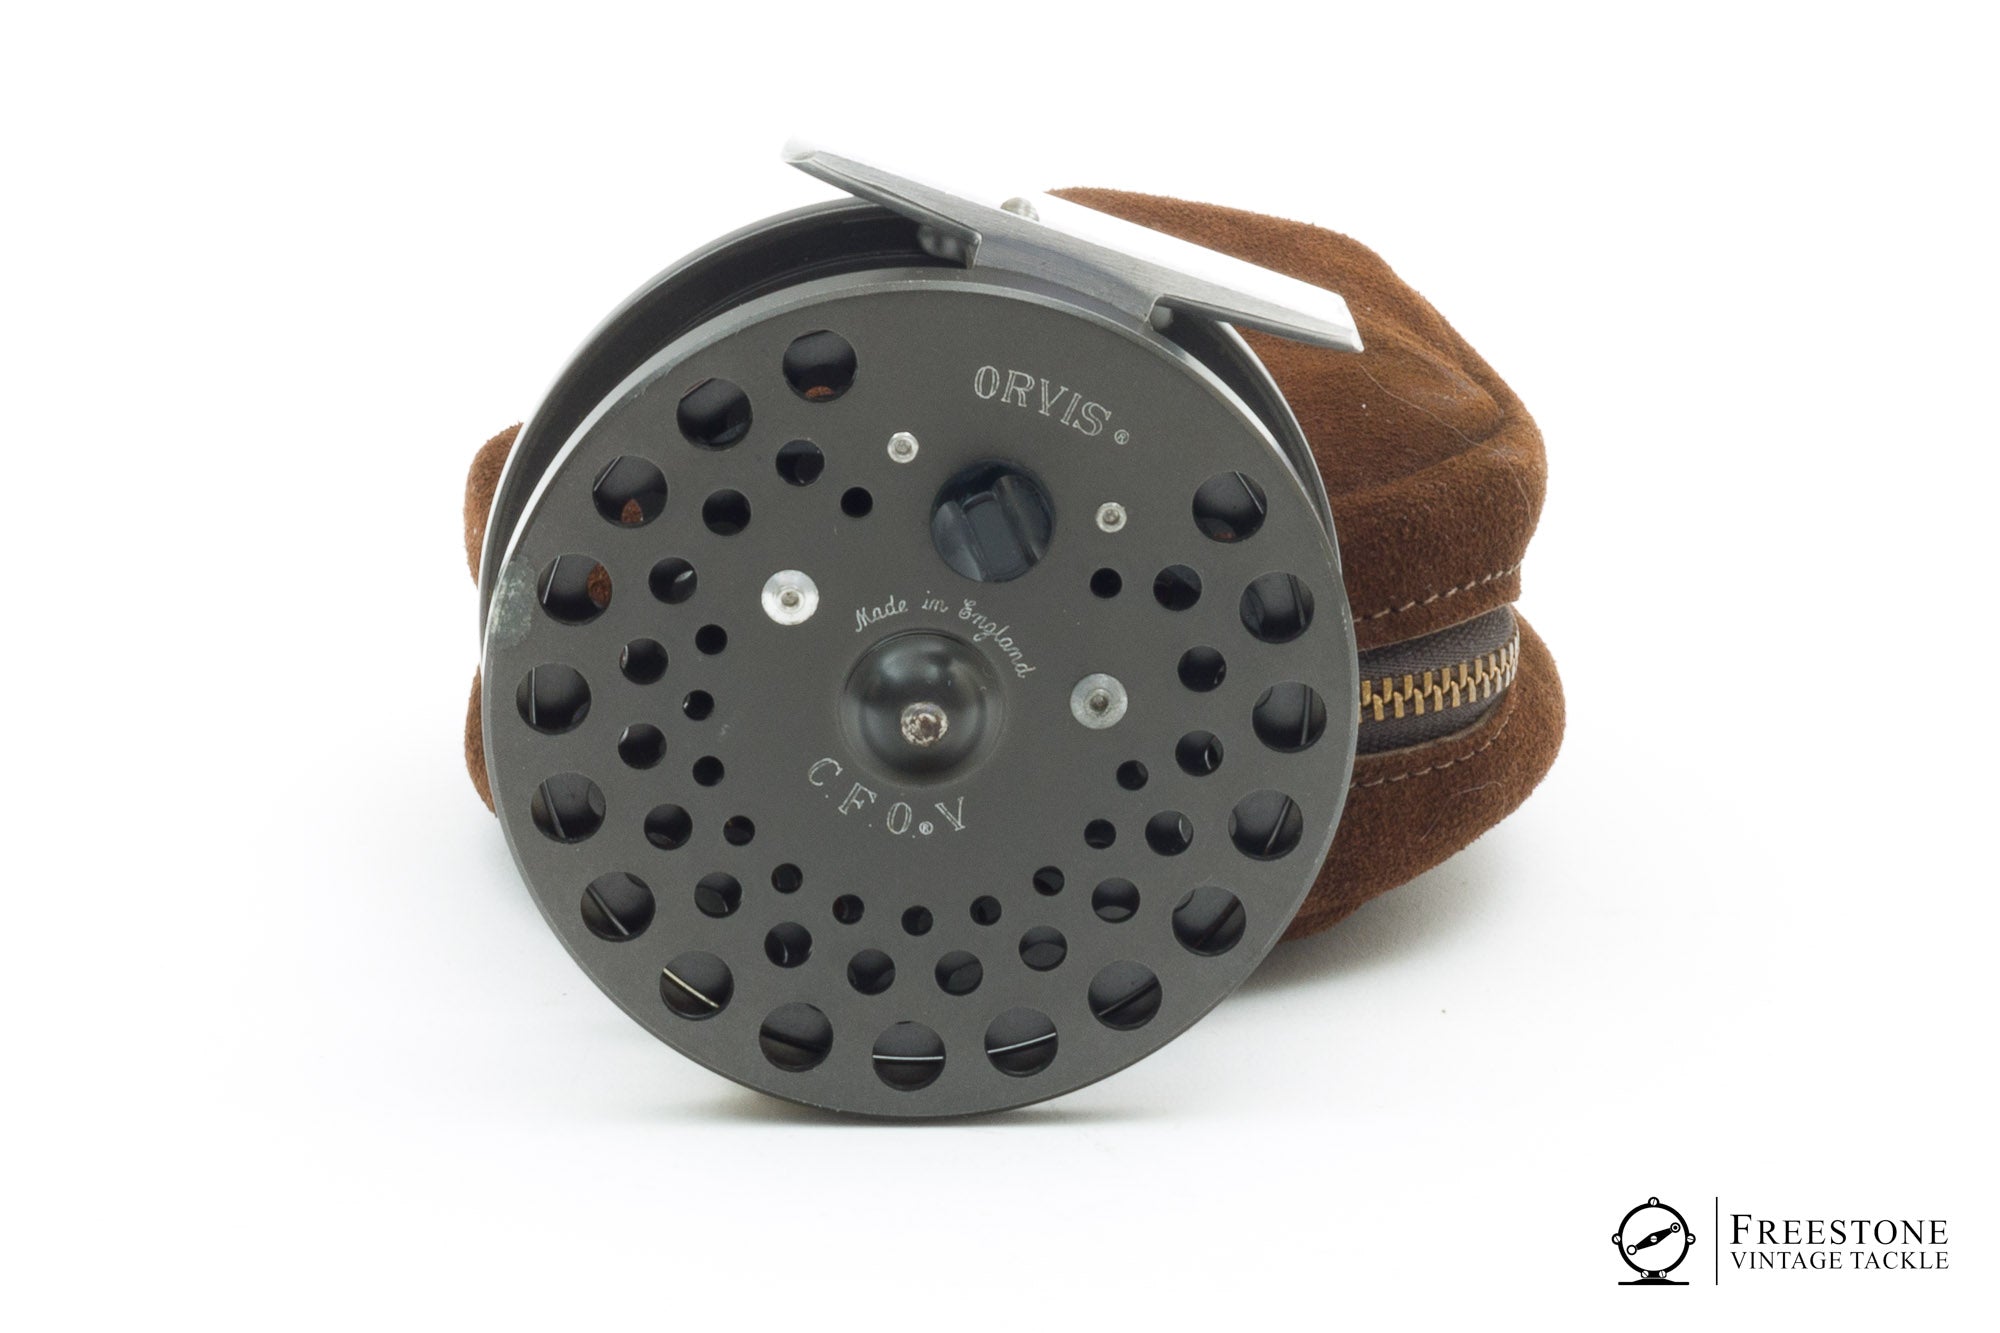 I just bought a 1990's/early 2000's Orvis Battenkill drag reel. Anyone else  used one? (Images included)